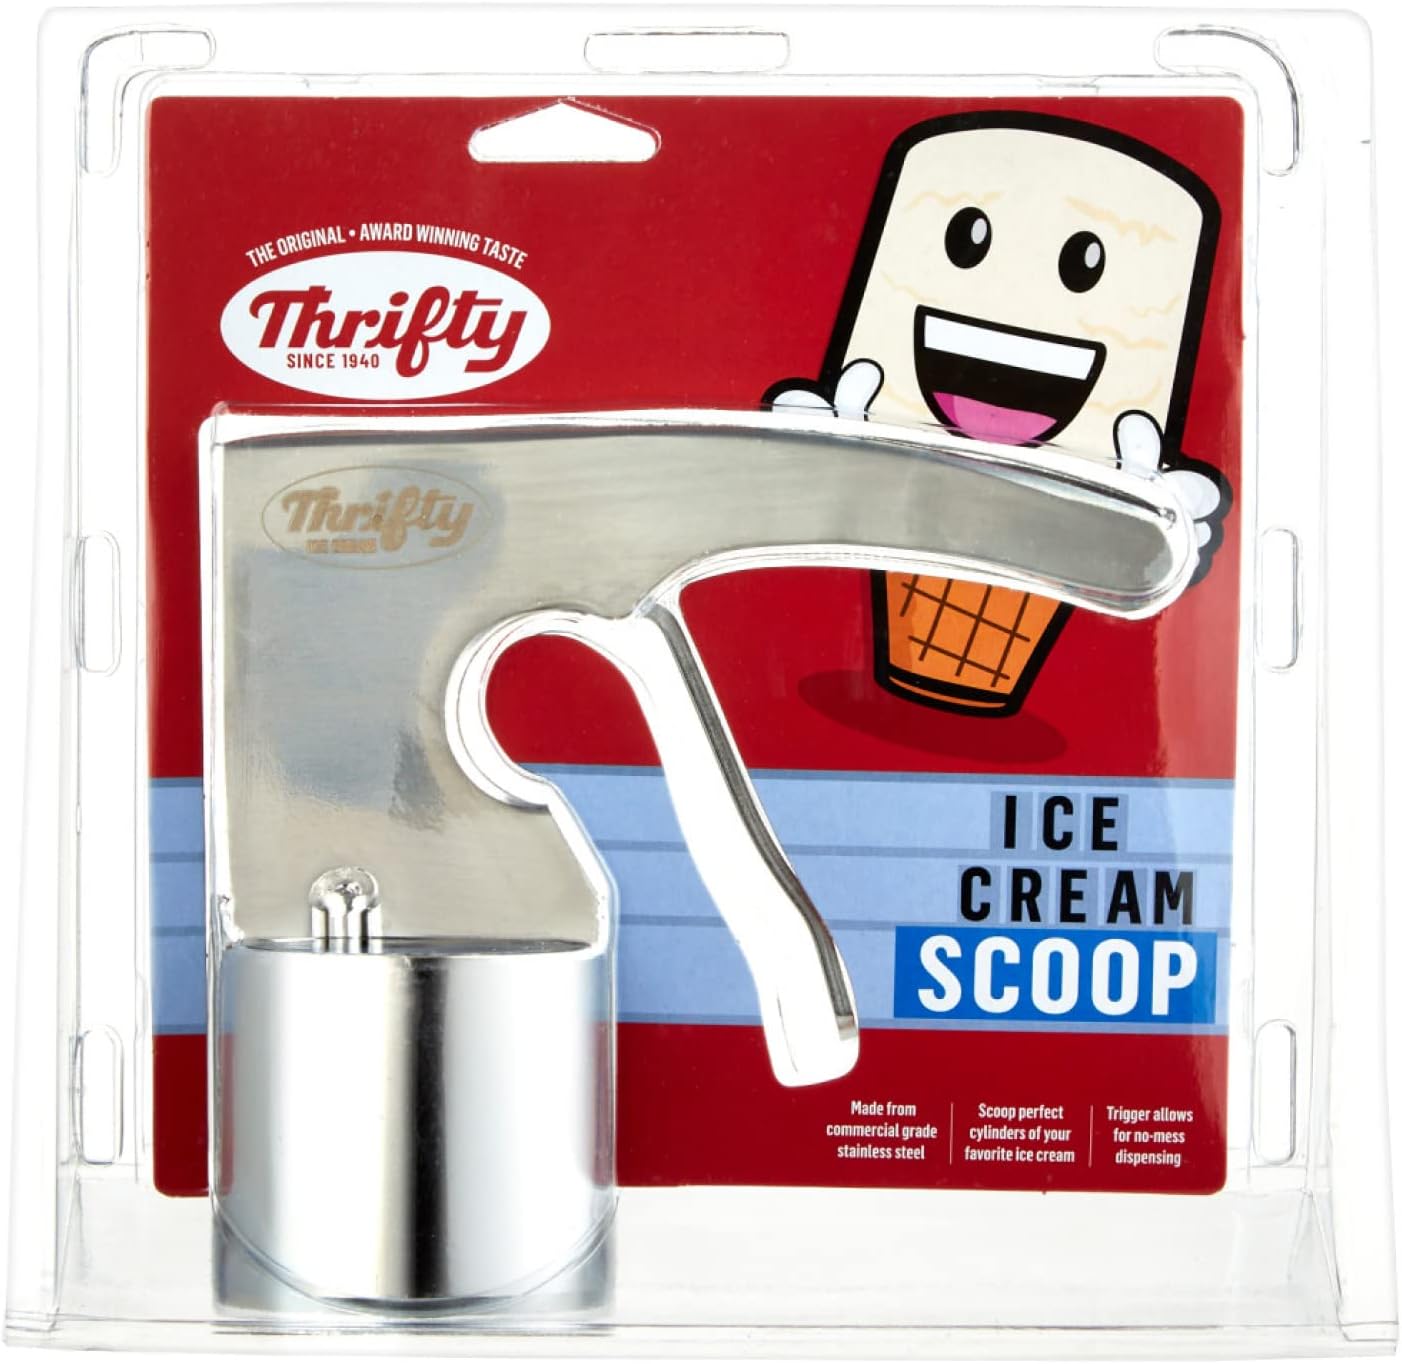 Thrifty Ice Cream Scoop Scooper Stainless Steel Rite-Aid